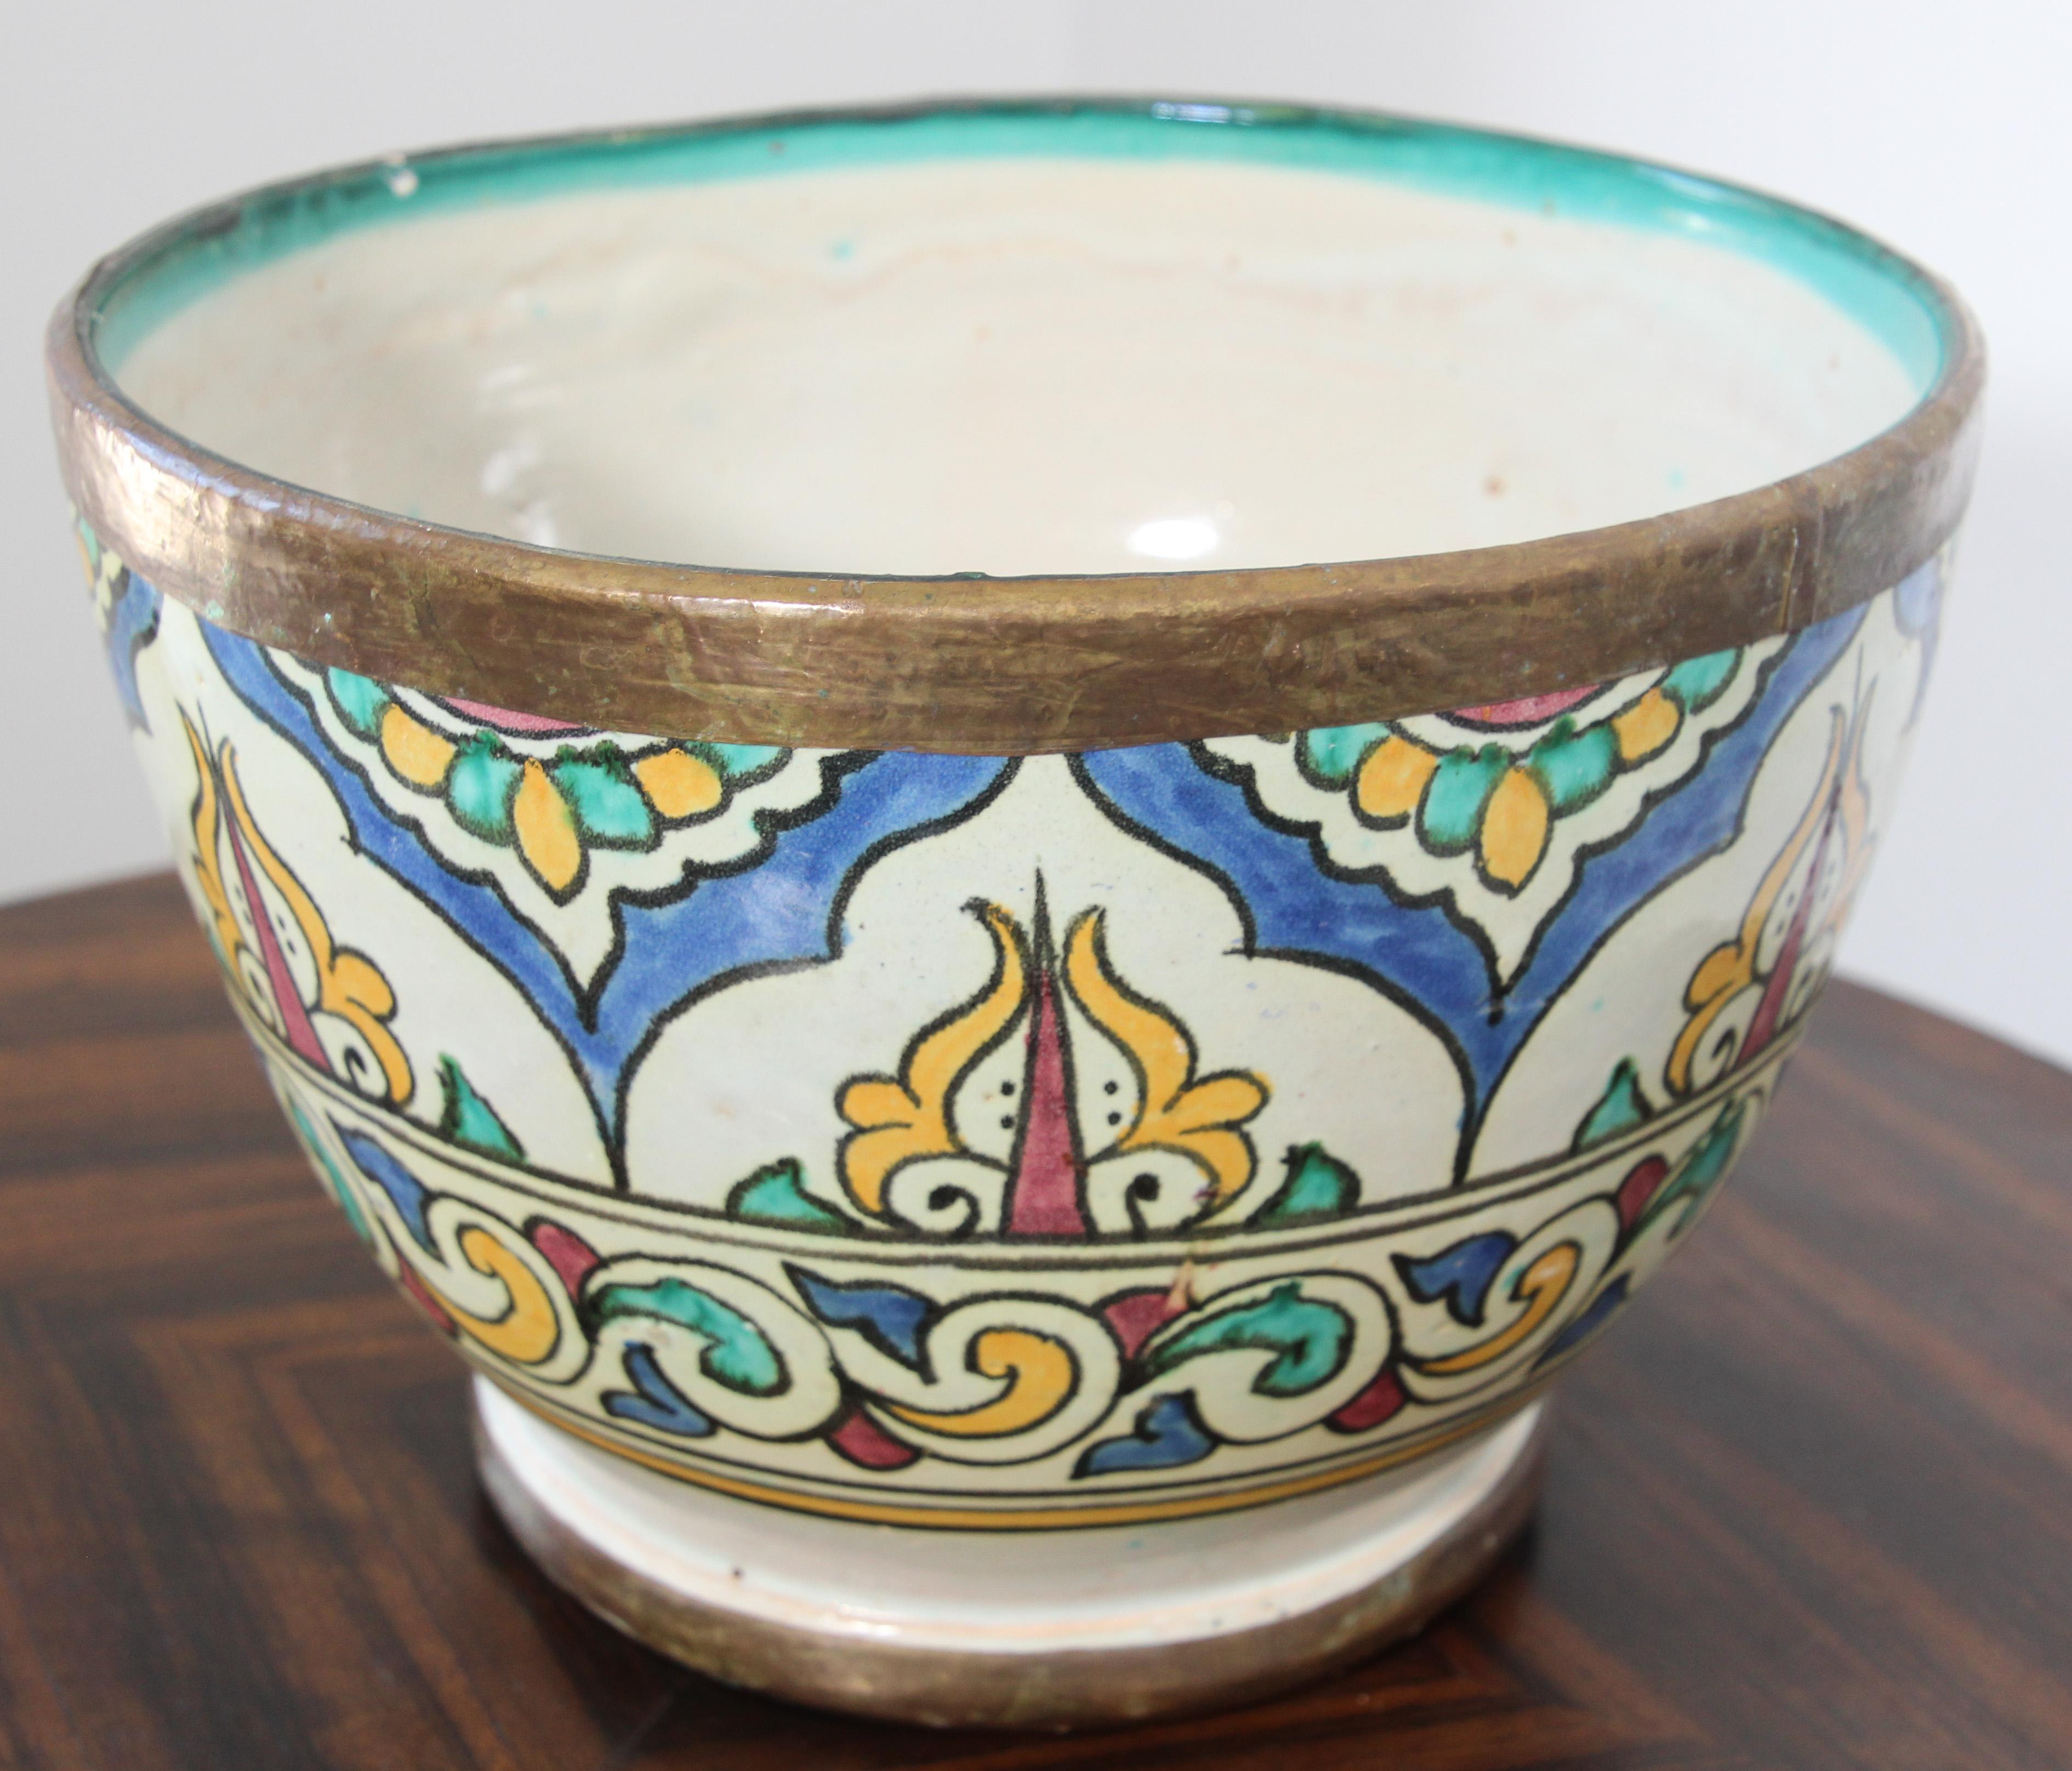 Hand-Crafted Antique Moroccan Ceramic Glazed Bowl Handcrafted in Fez Meknes Jobbana 1900 For Sale